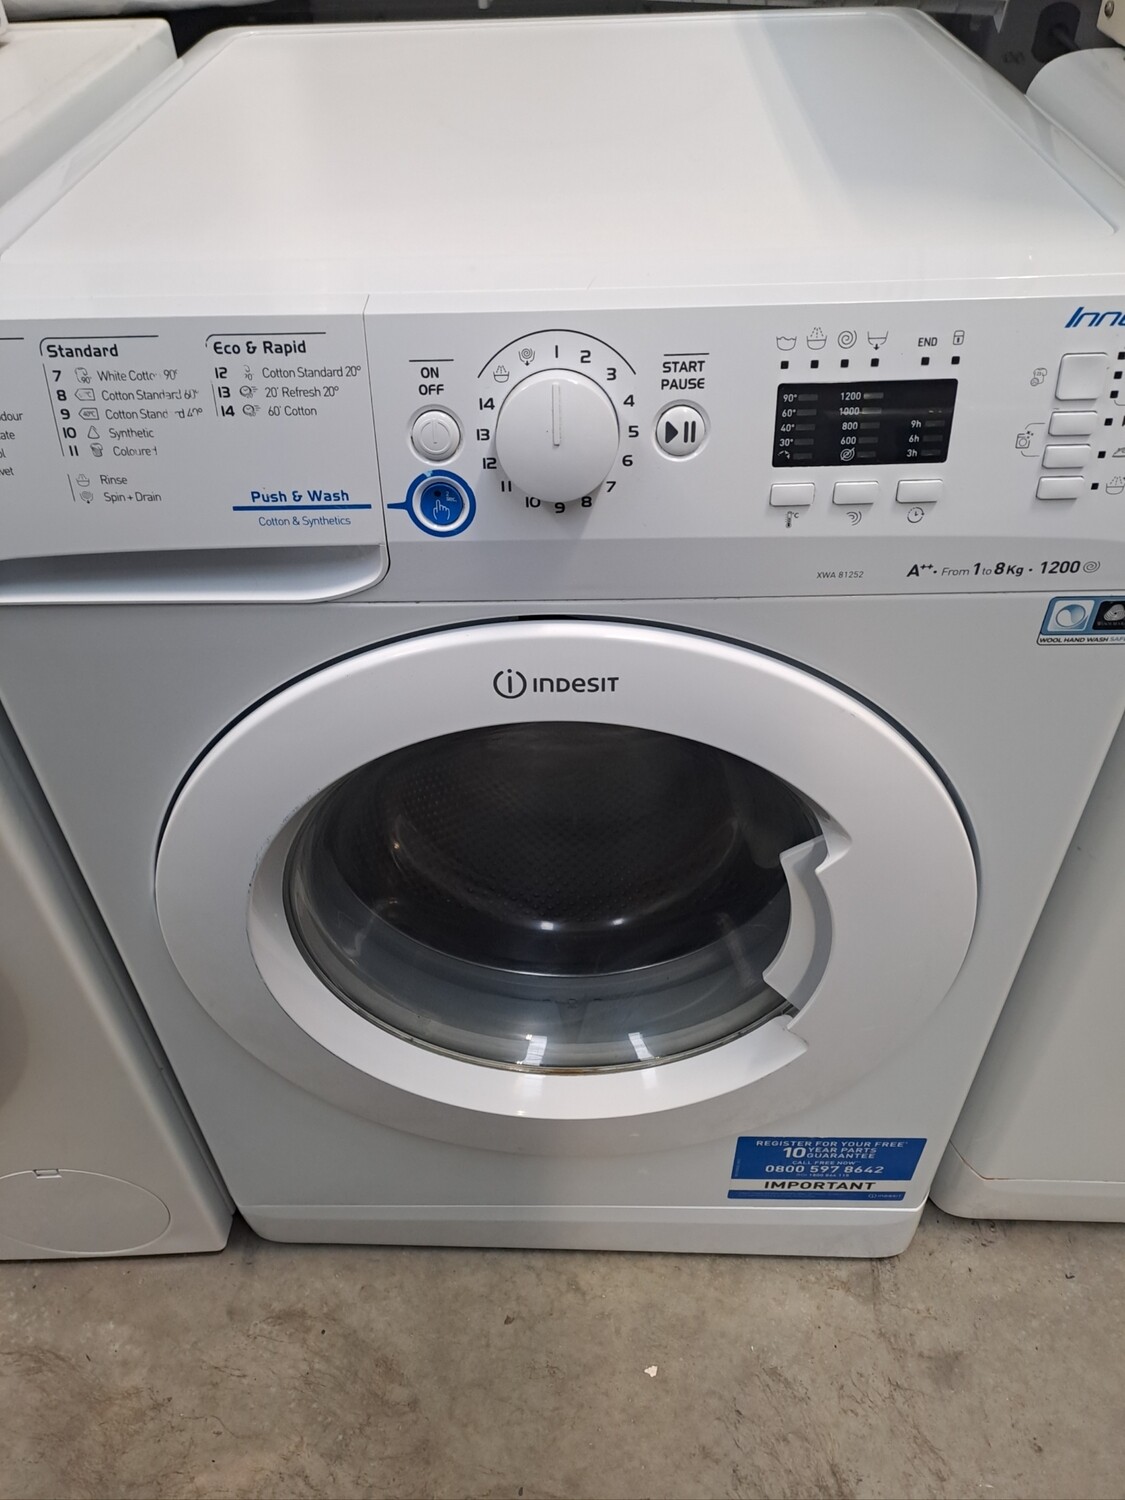 Indesit BWA81483XWUK 8kg Load, 1400 Spin A+++ Washing Machine - White - Refurbished - 6 Month Guarantee. This item is located in our Whitby Road Shop 